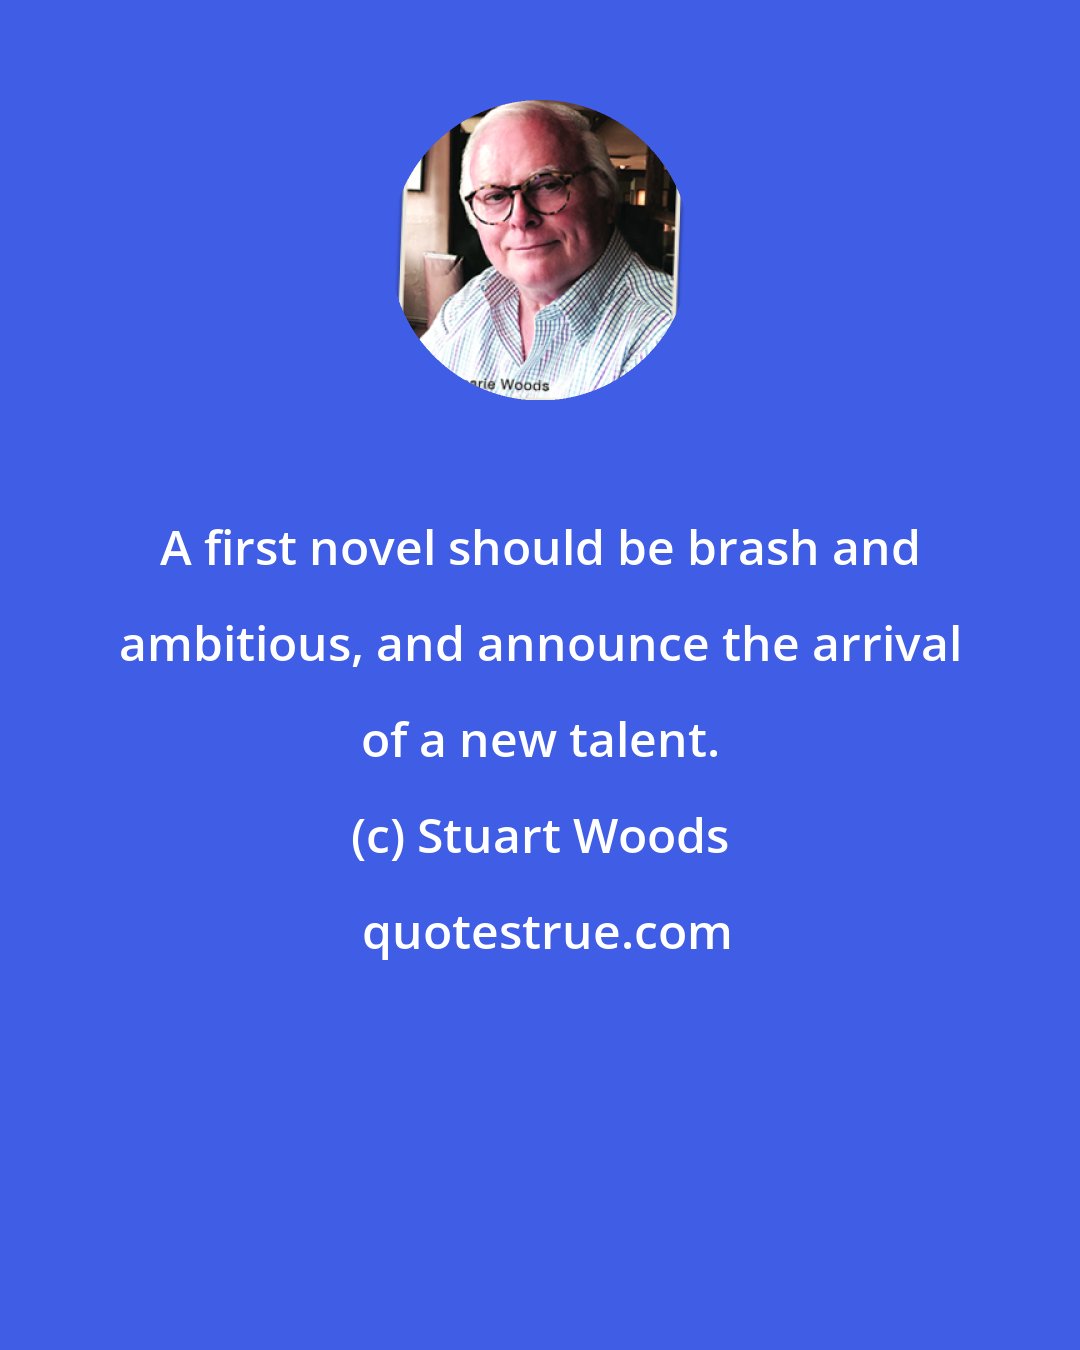 Stuart Woods: A first novel should be brash and ambitious, and announce the arrival of a new talent.